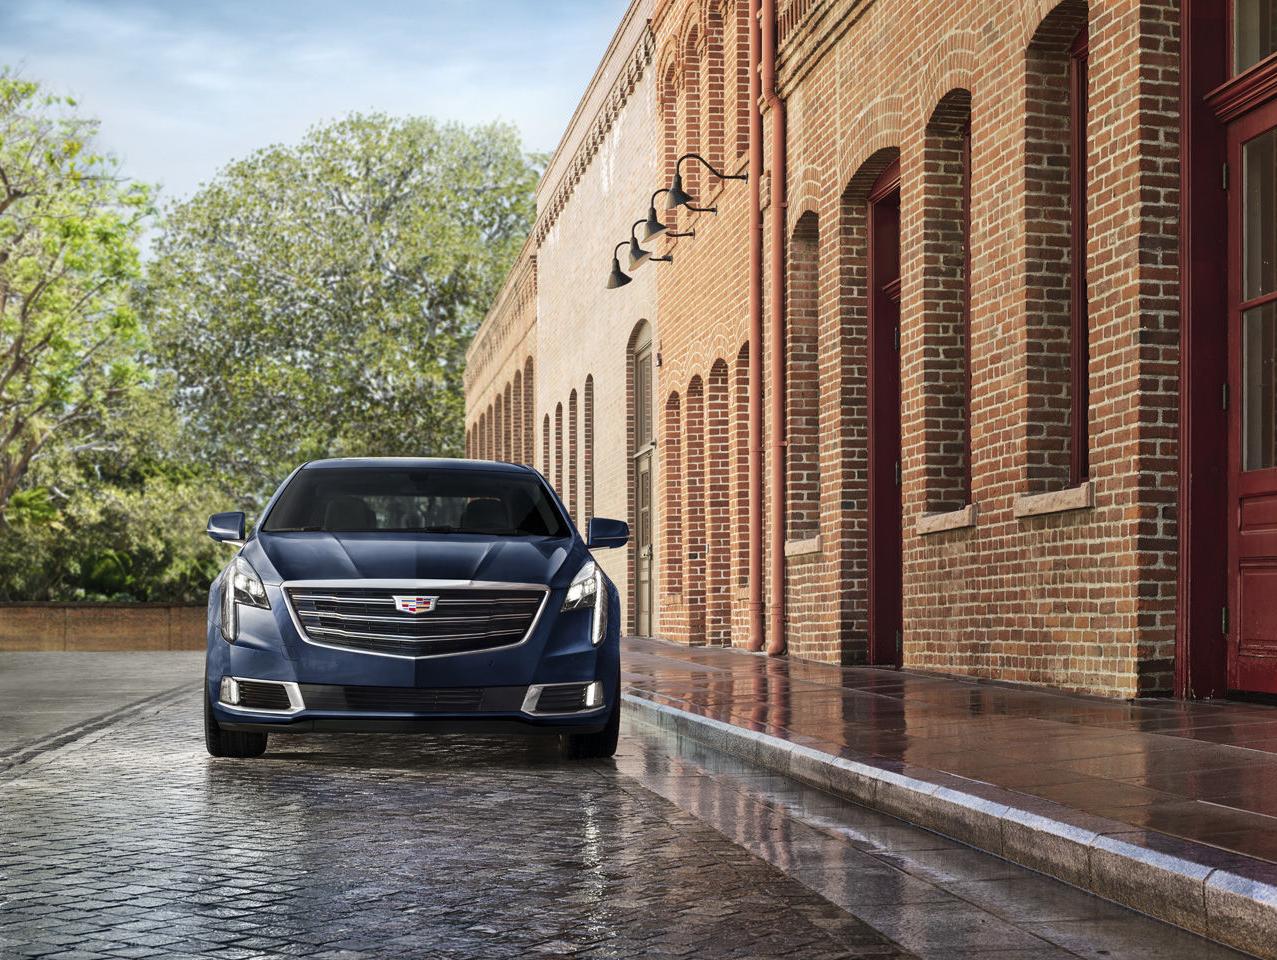 2018 Cadillac XTS | Lifestyle | Brick Building and Tree background